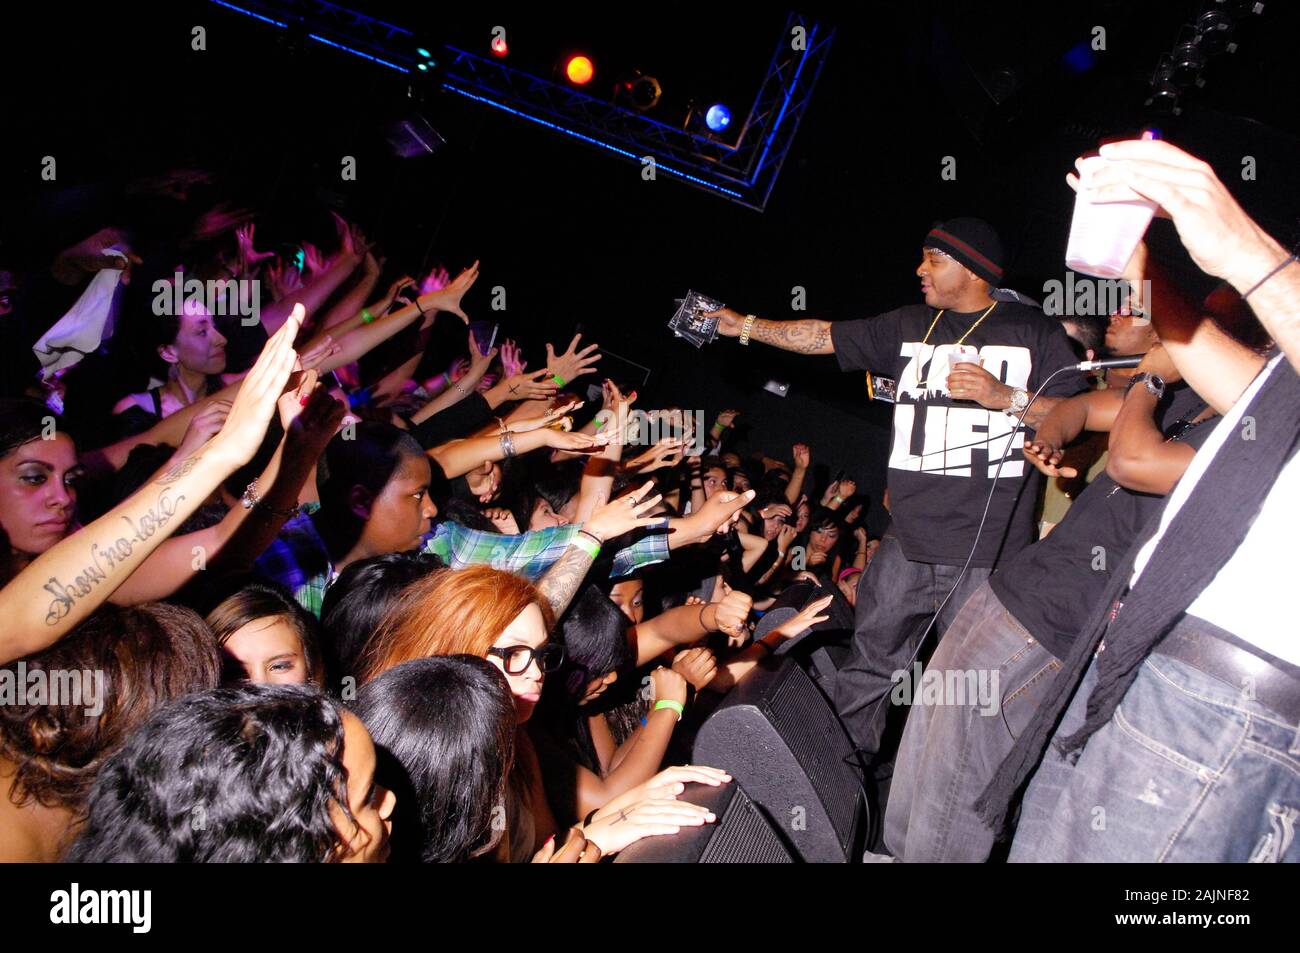 Rapper 40 Glocc on stage on May 20, 2010 in Los Angeles, California. Stock Photo